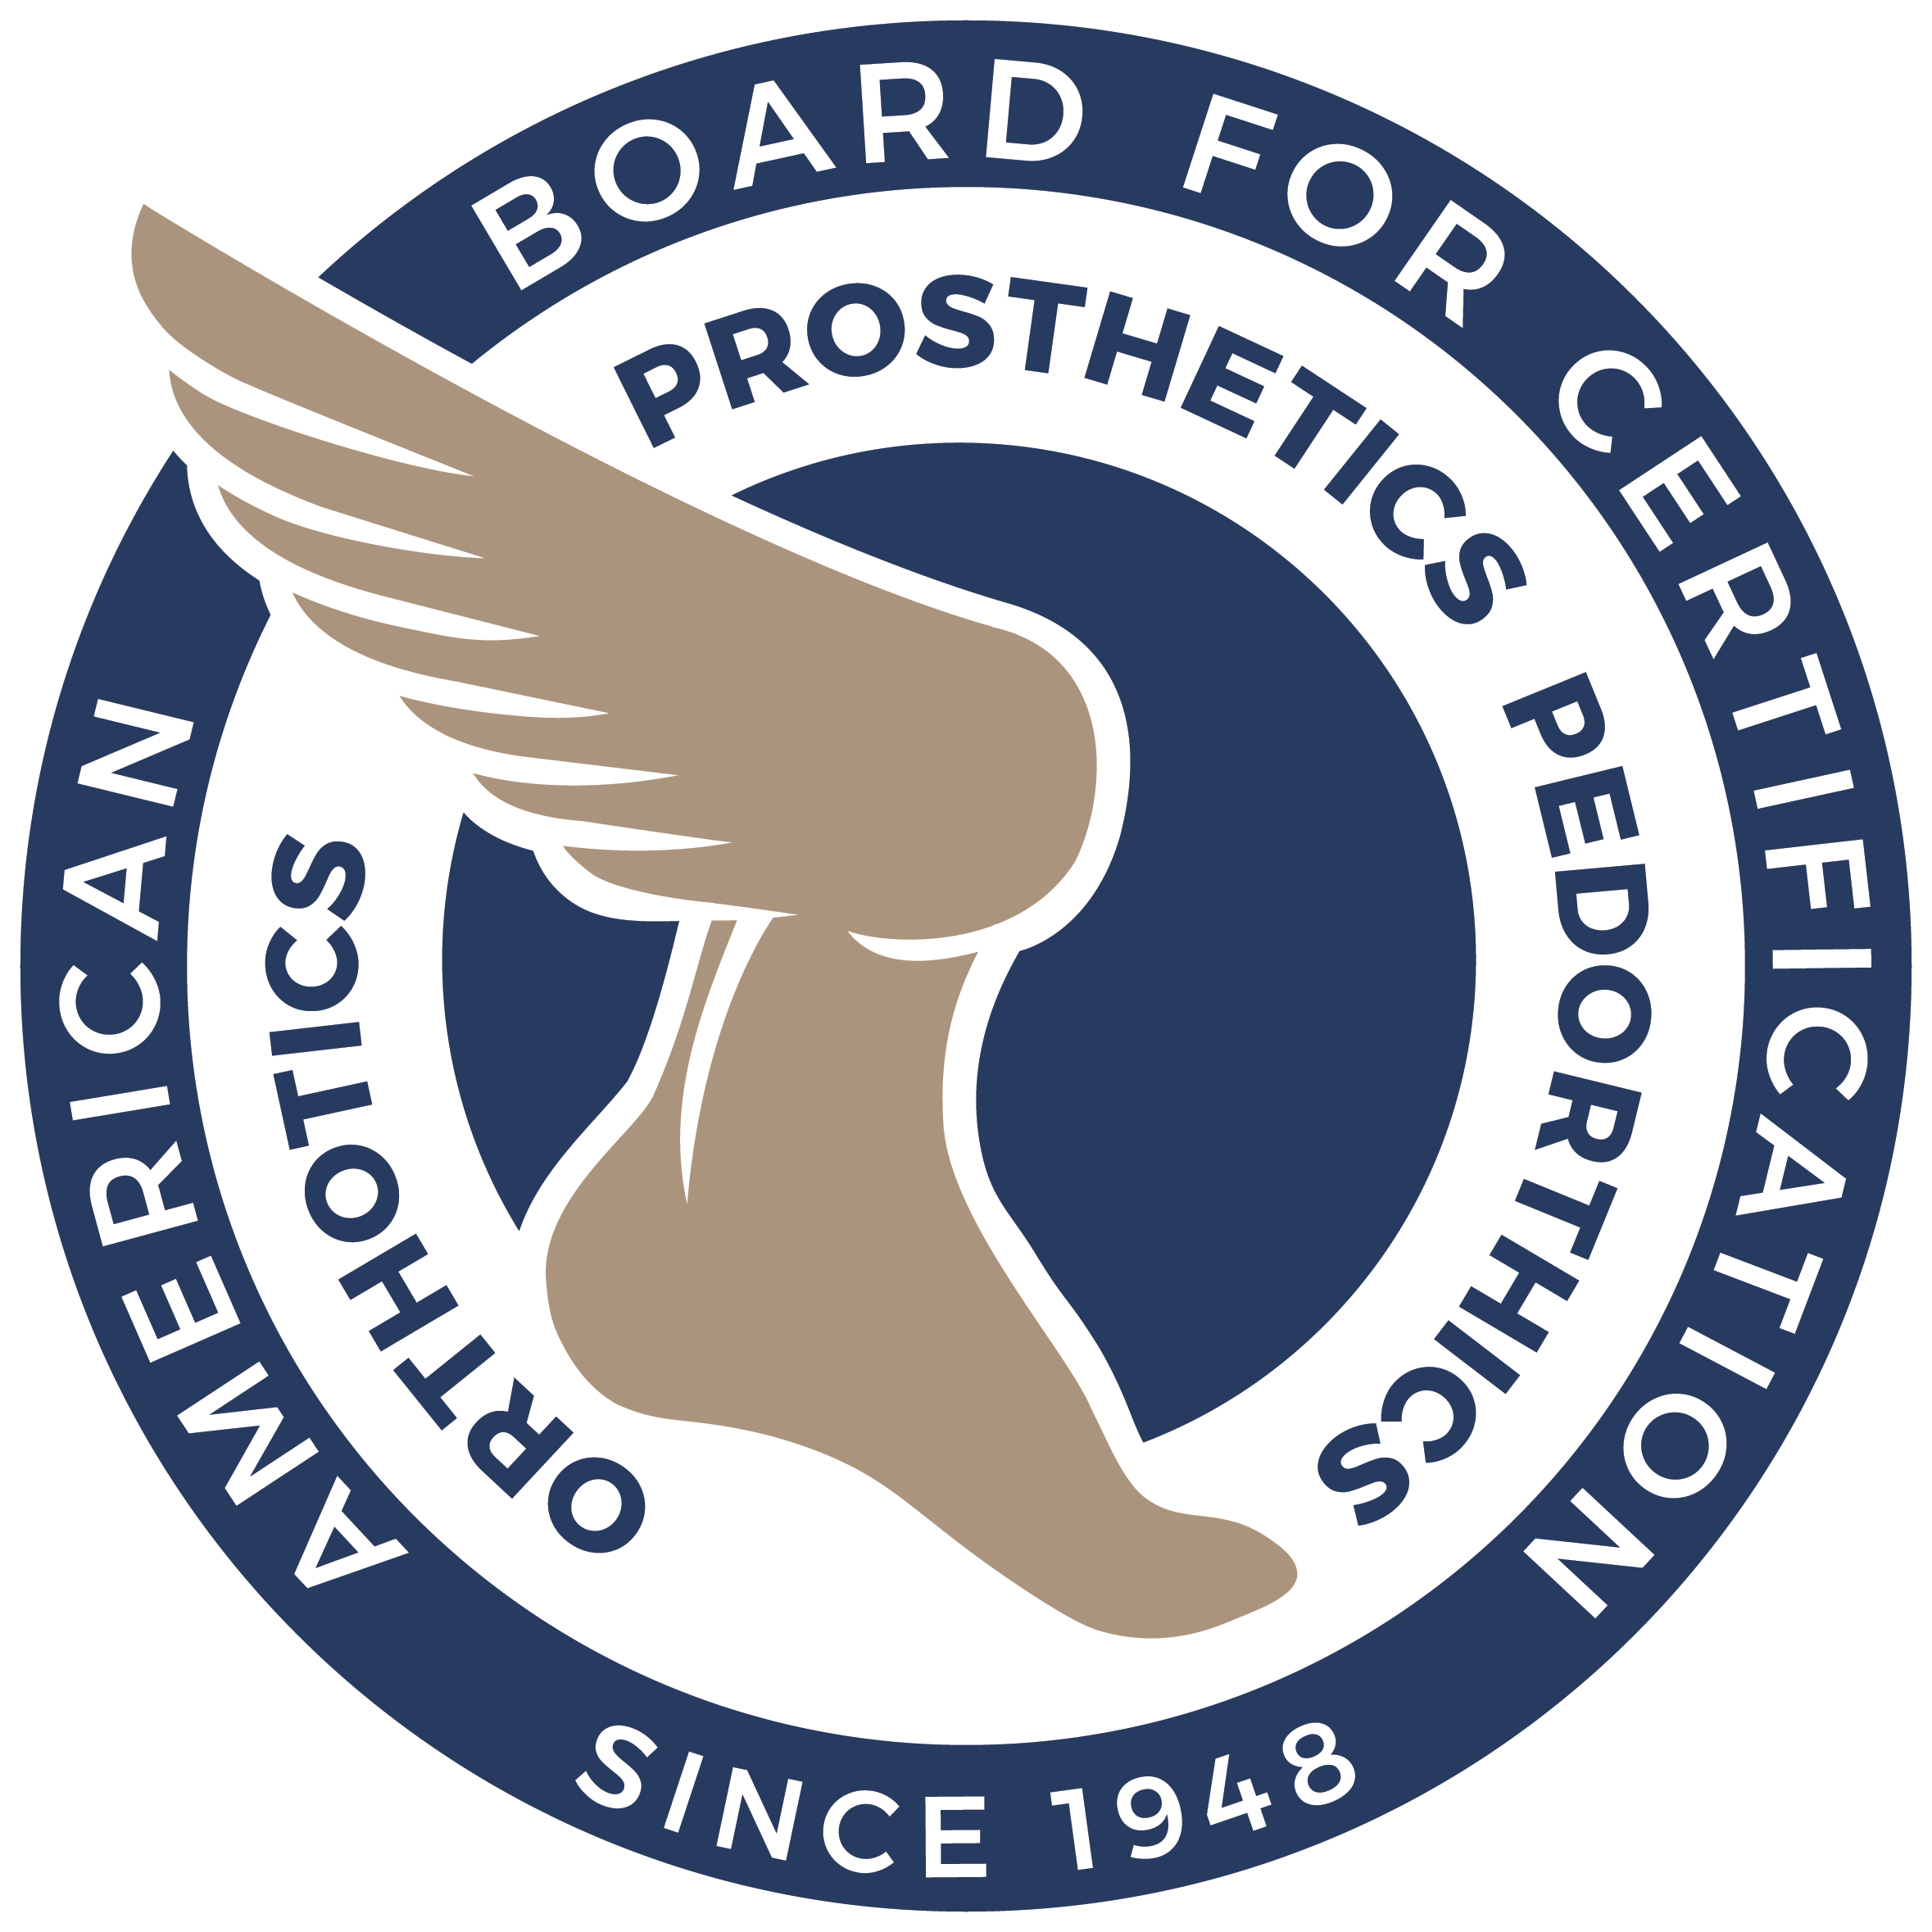 American Board for Certification in Orthotics and Prosthetics